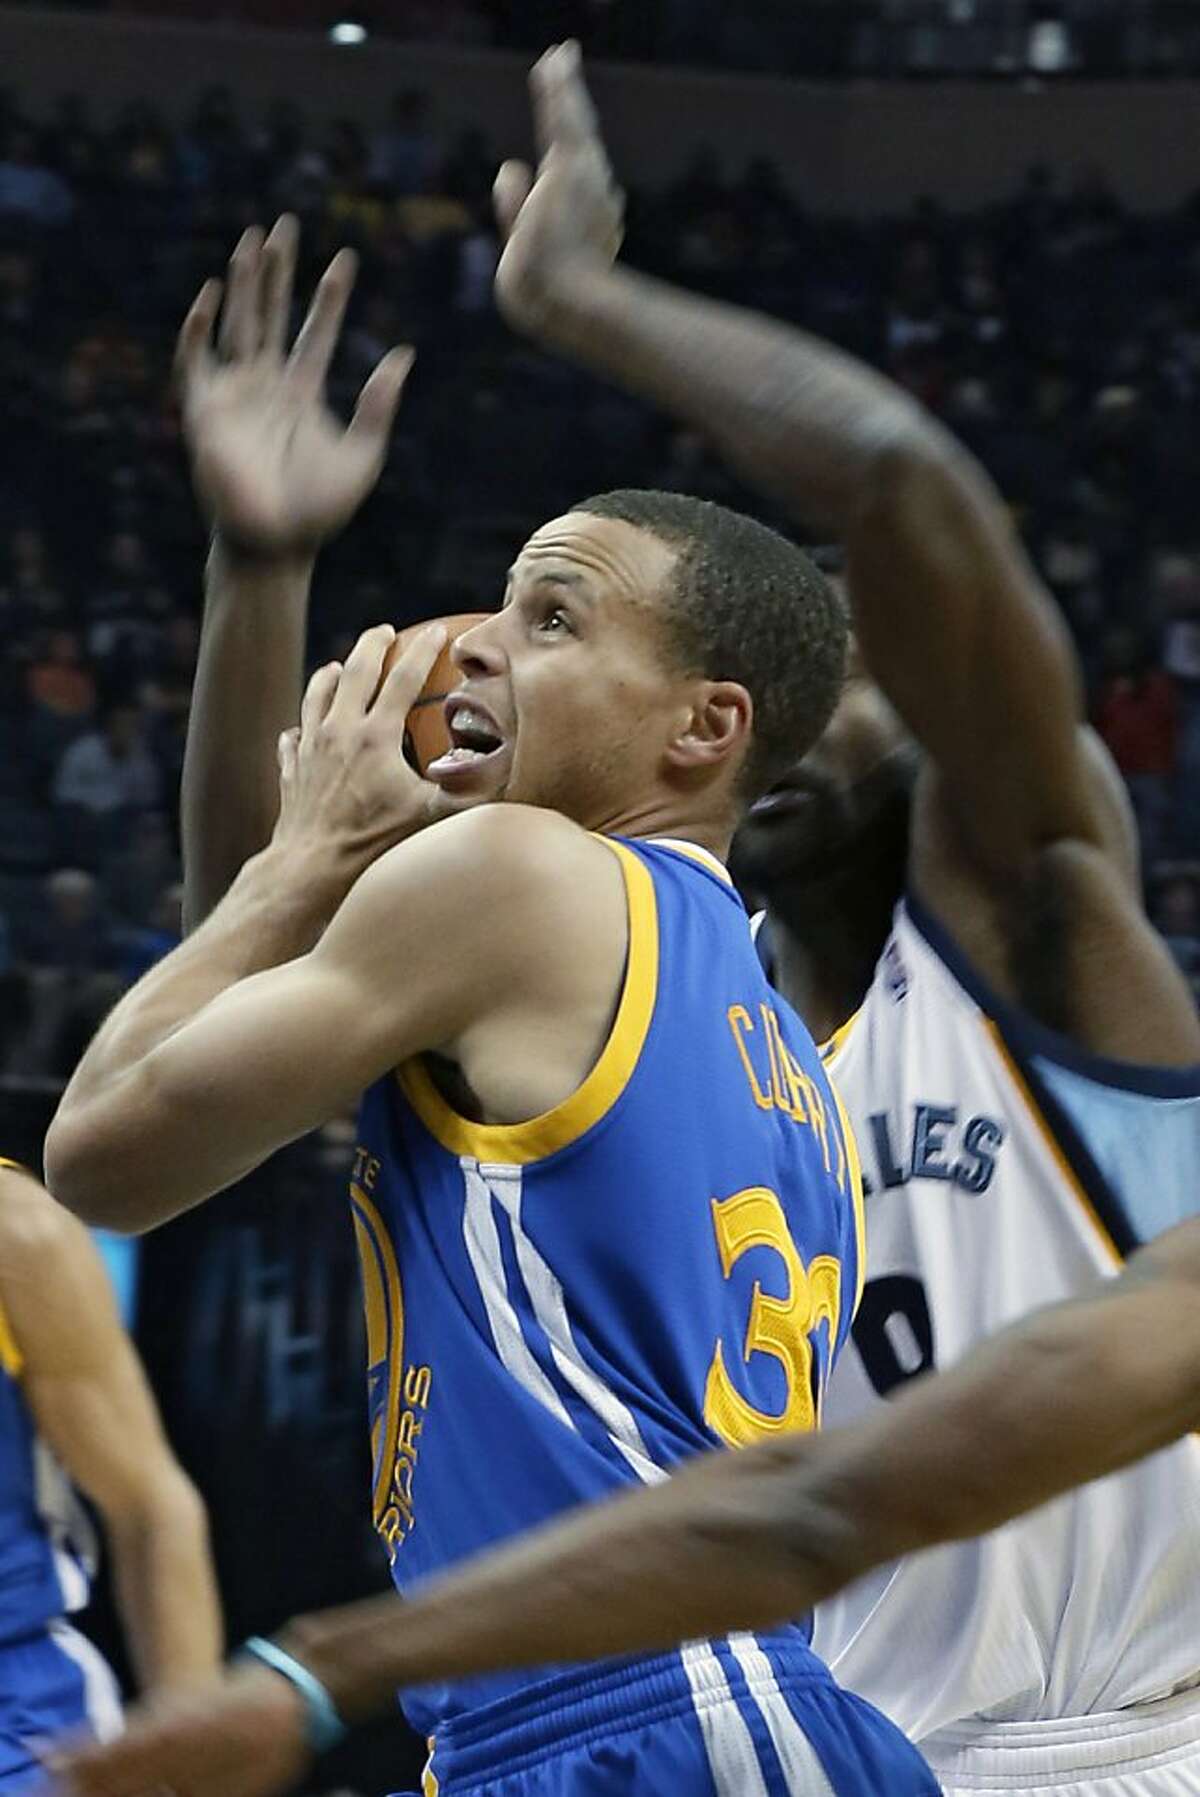 Golden State Warriors guard Stephen Curry goes to the basket in front of Memphis Grizzlies defenders in the first half of an NBA basketball game in Memphis, Tenn., Saturday, Nov. 9, 2013. (AP Photo/Danny Johnston)